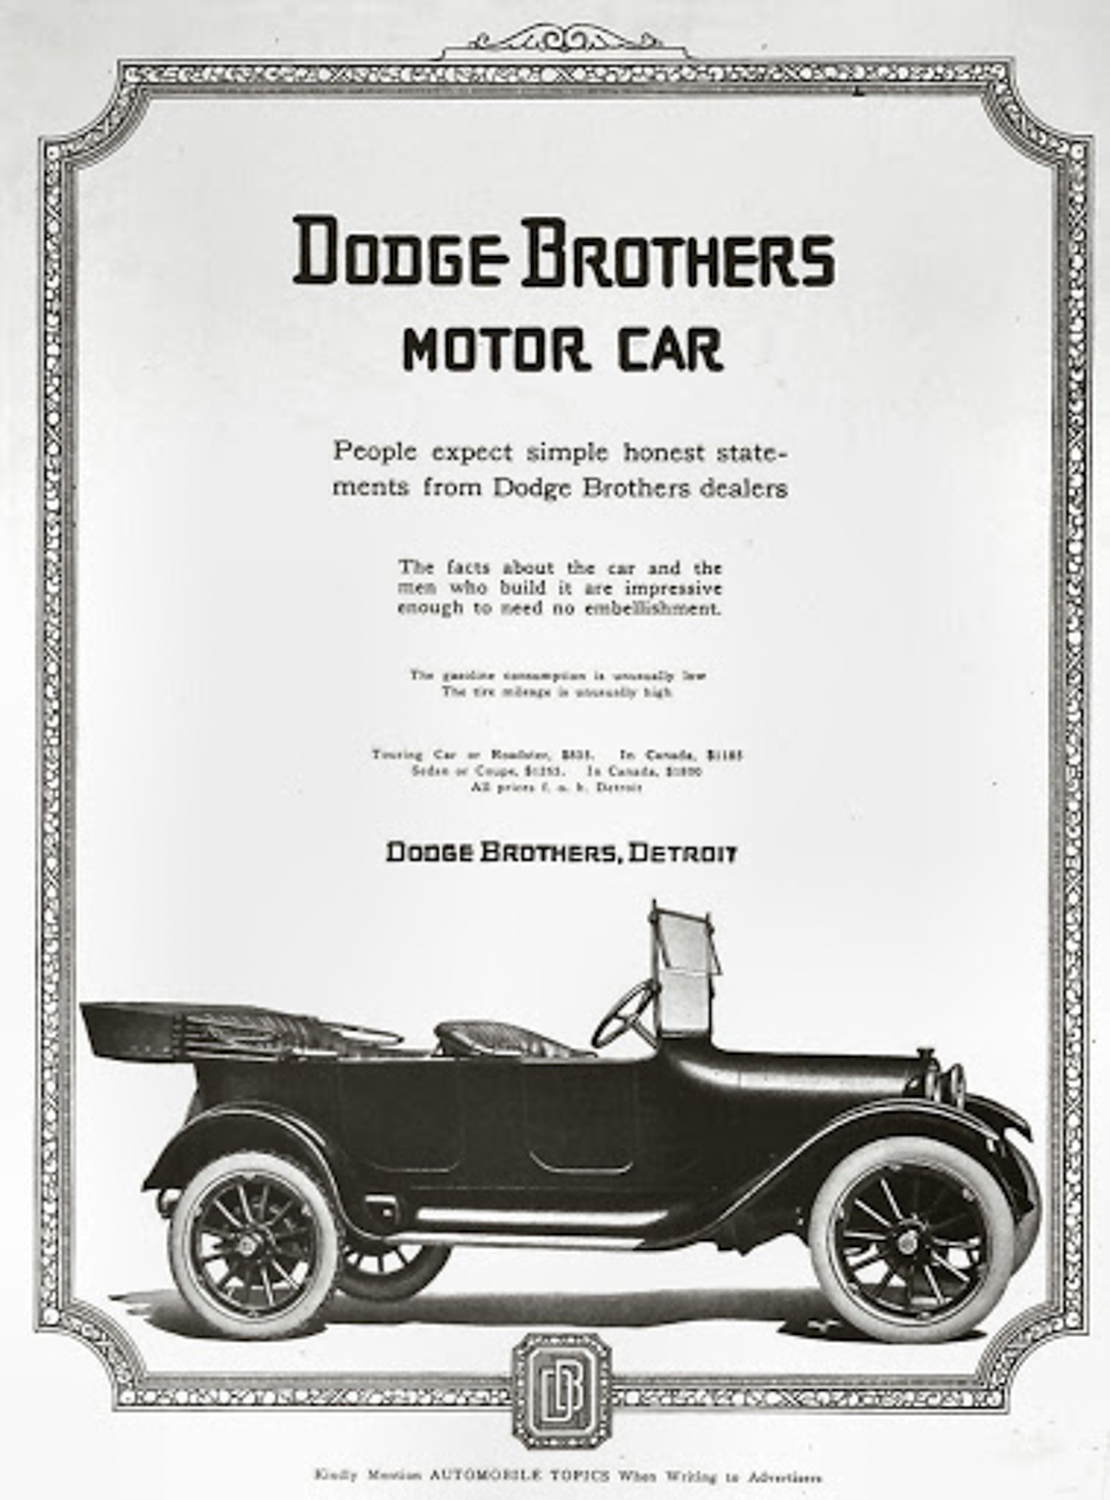 In 1915, Dodge Brothers would produce 45,000 cars, and they would become the fourth best selling auto manufacturer on the US the next year. 